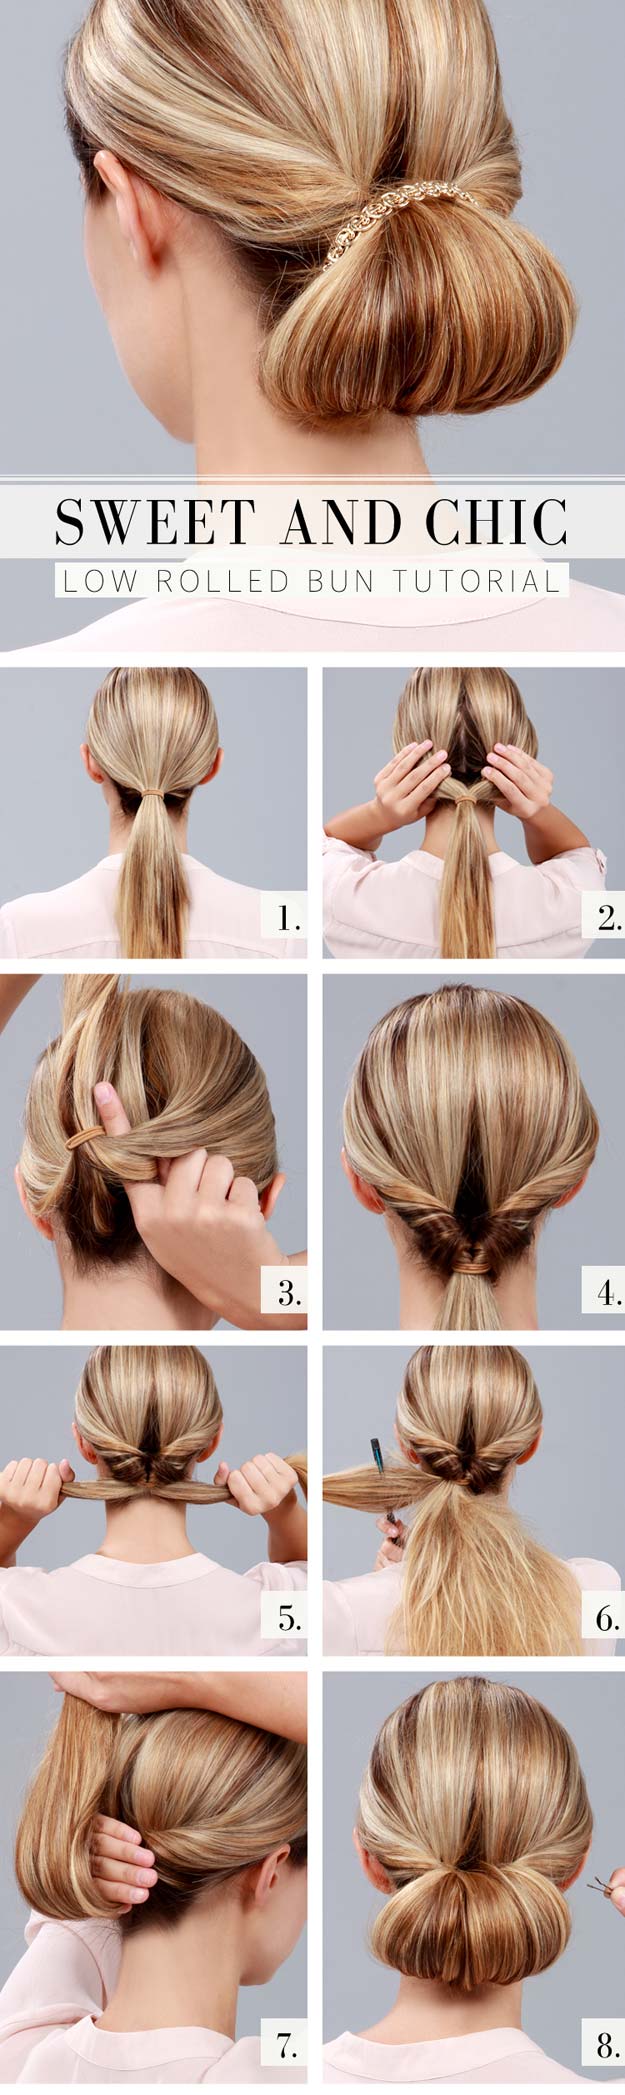 Best Hairstyles for Long Hair - Chic Low Rolled Bun- Step by Step Tutorials for Easy Curls, Updo, Half Up, Braids and Lazy Girl Looks. Prom Ideas, Special Occasion Hair and Braiding Instructions for Teens, Teenagers and Adults, Women and Girls 